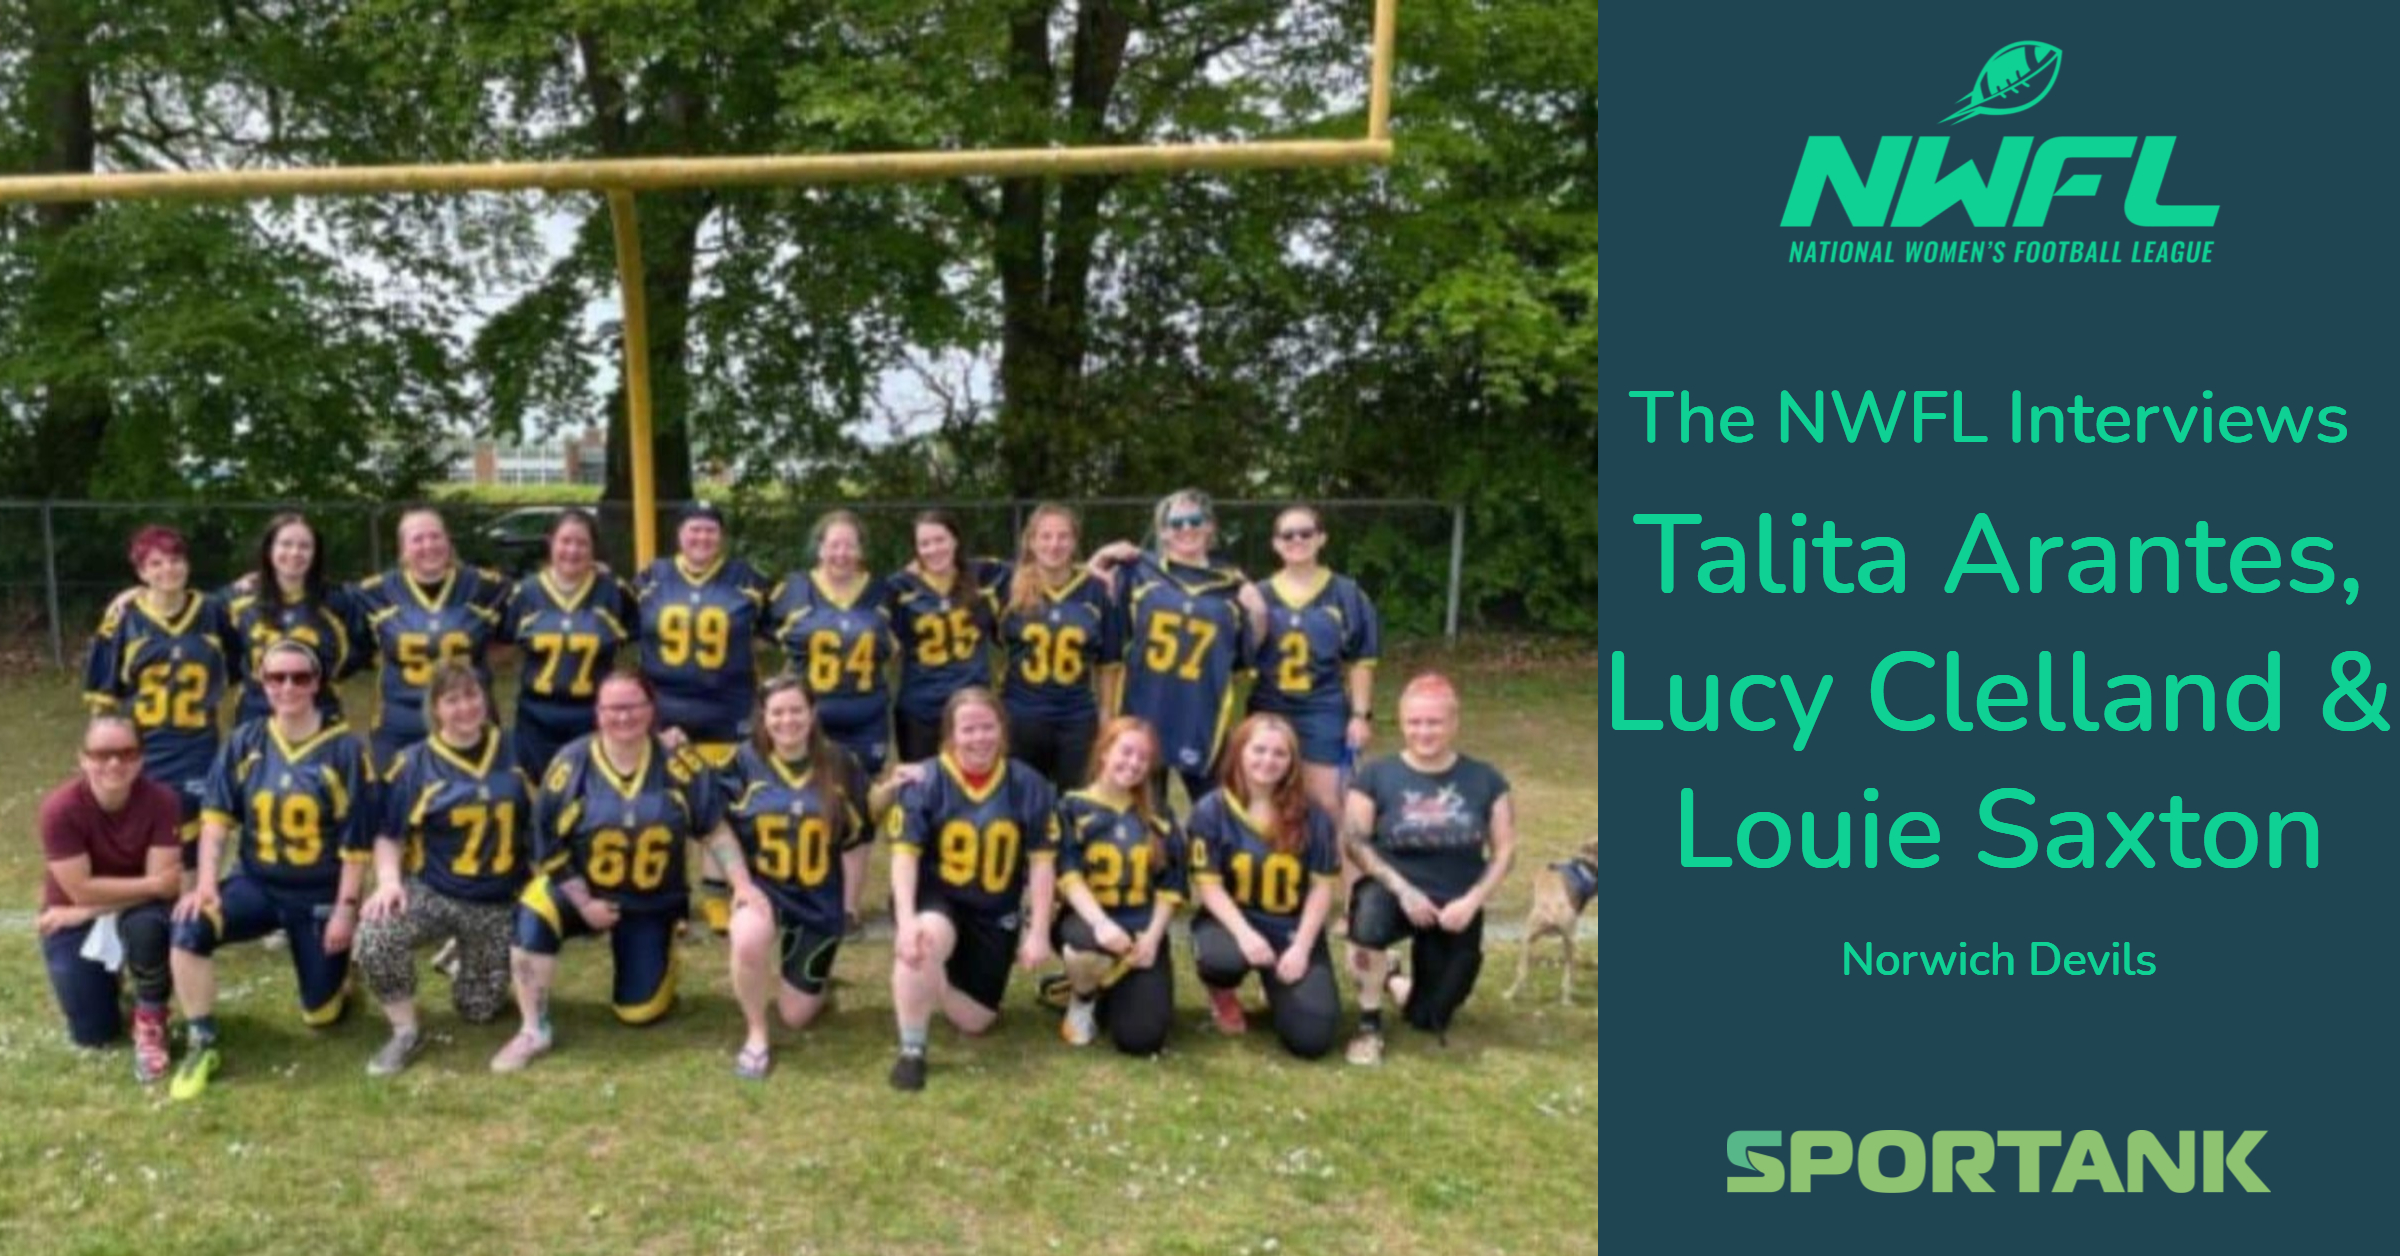 The NWFL Interviews: Talita Arantes, Lucy Clelland &#038; Louie Saxton of the Norwich Devils